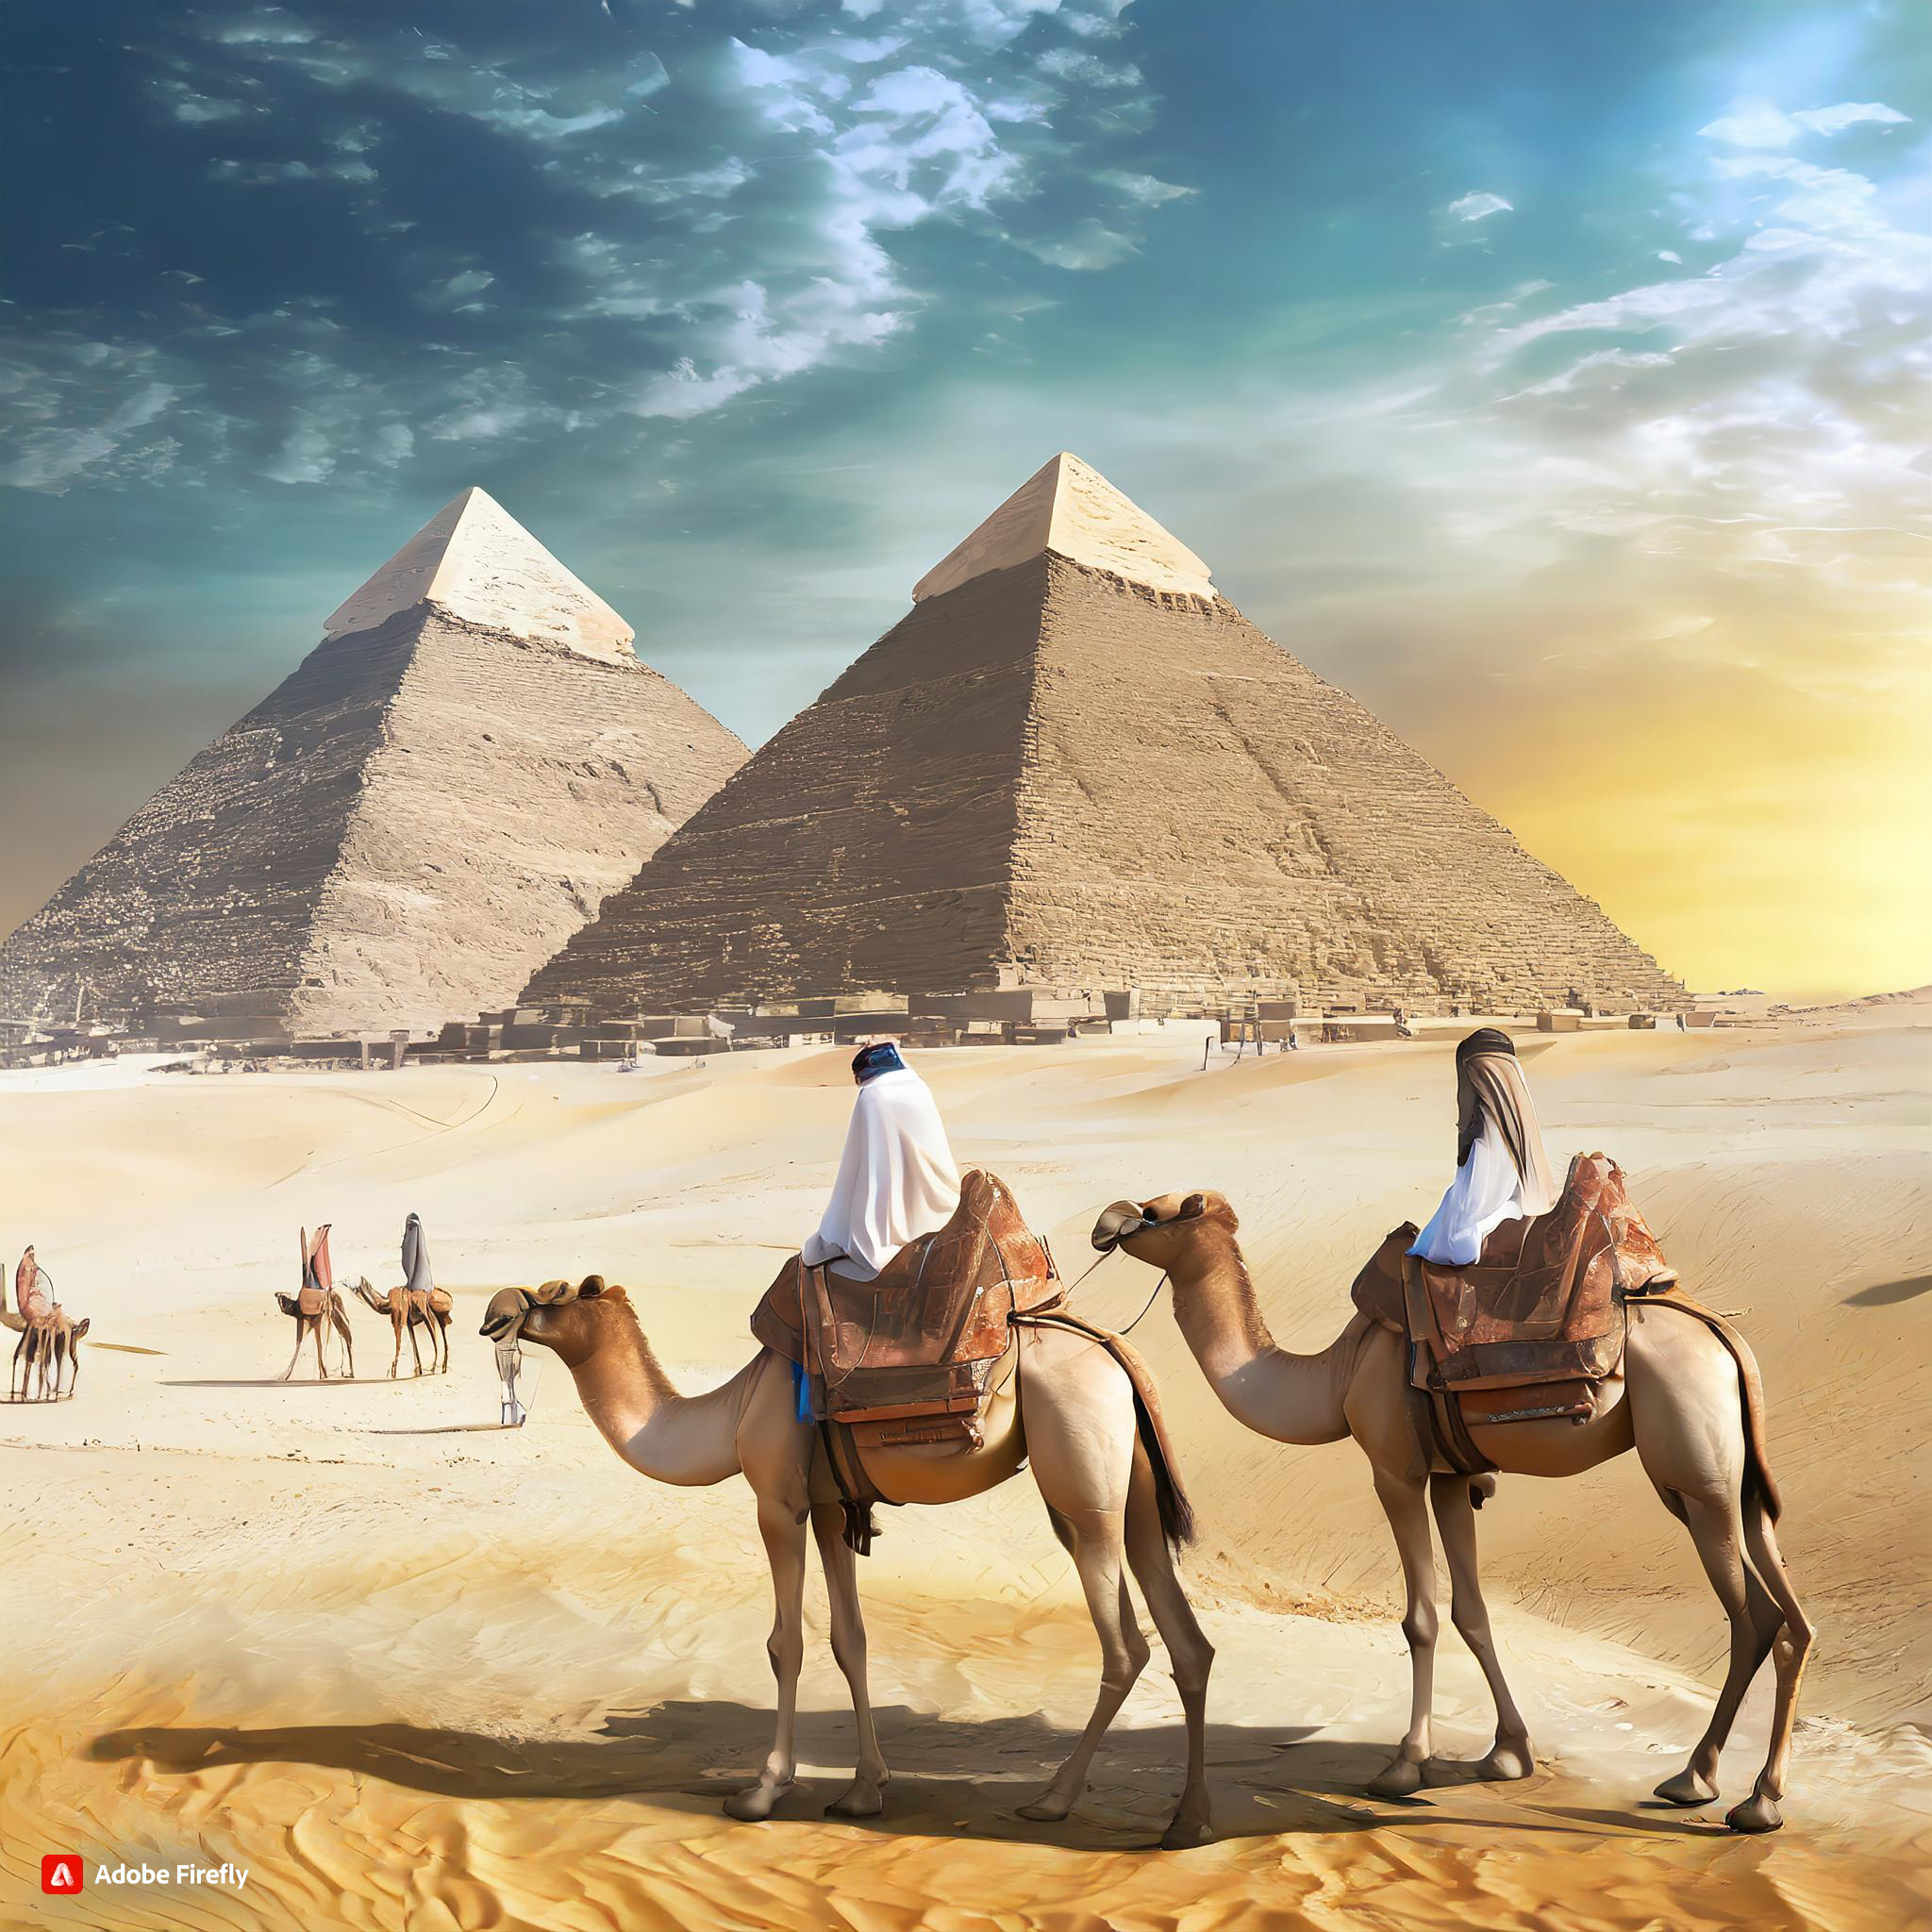  Firefly A surreal snap of the Egyptian pyramids in daytime with camels 14232.jpg